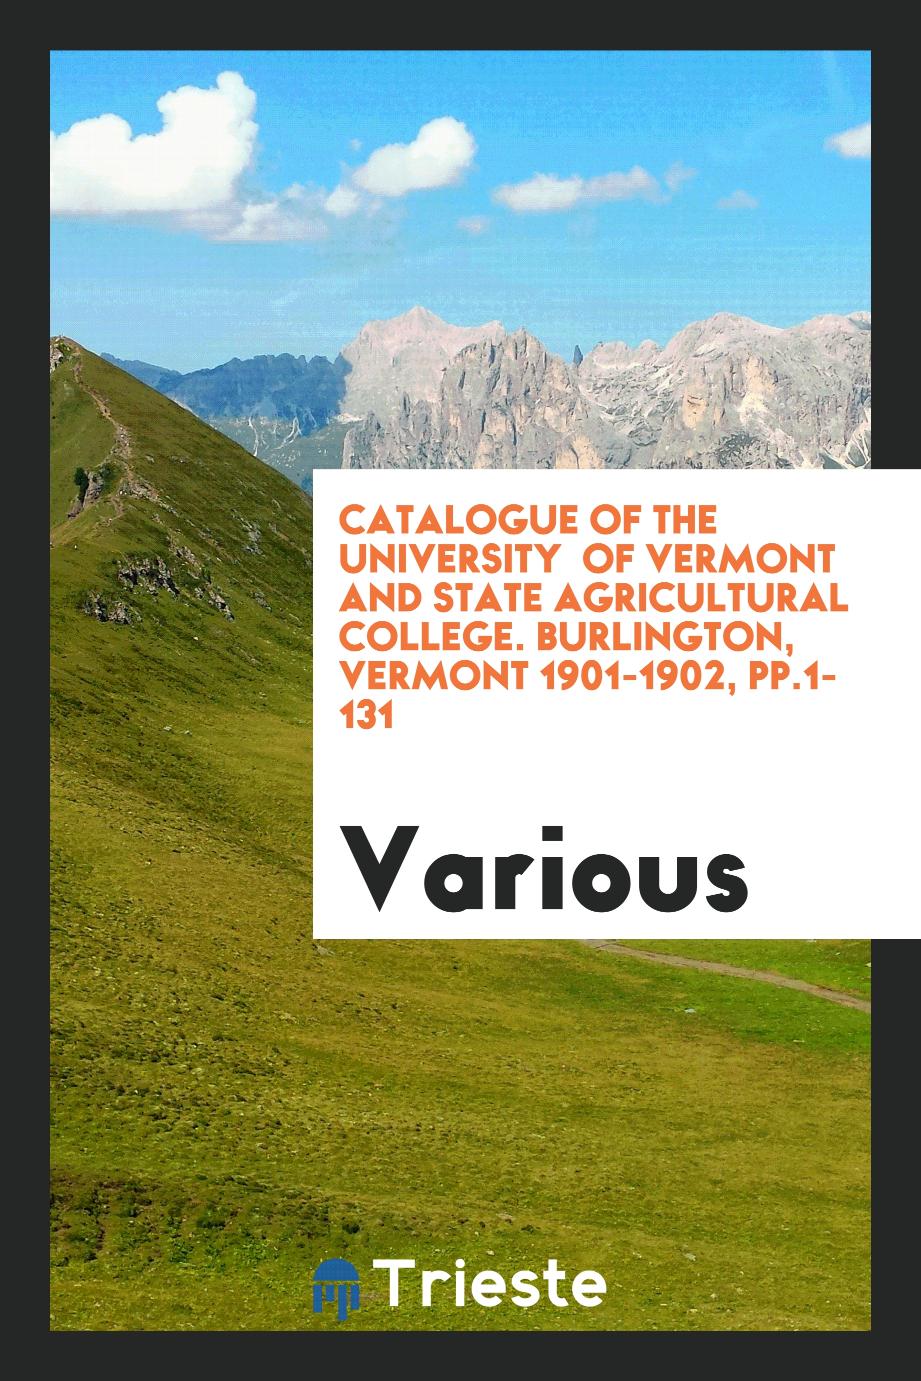 Catalogue of the University of Vermont and State Agricultural College. Burlington, Vermont 1901-1902, pp.1-131